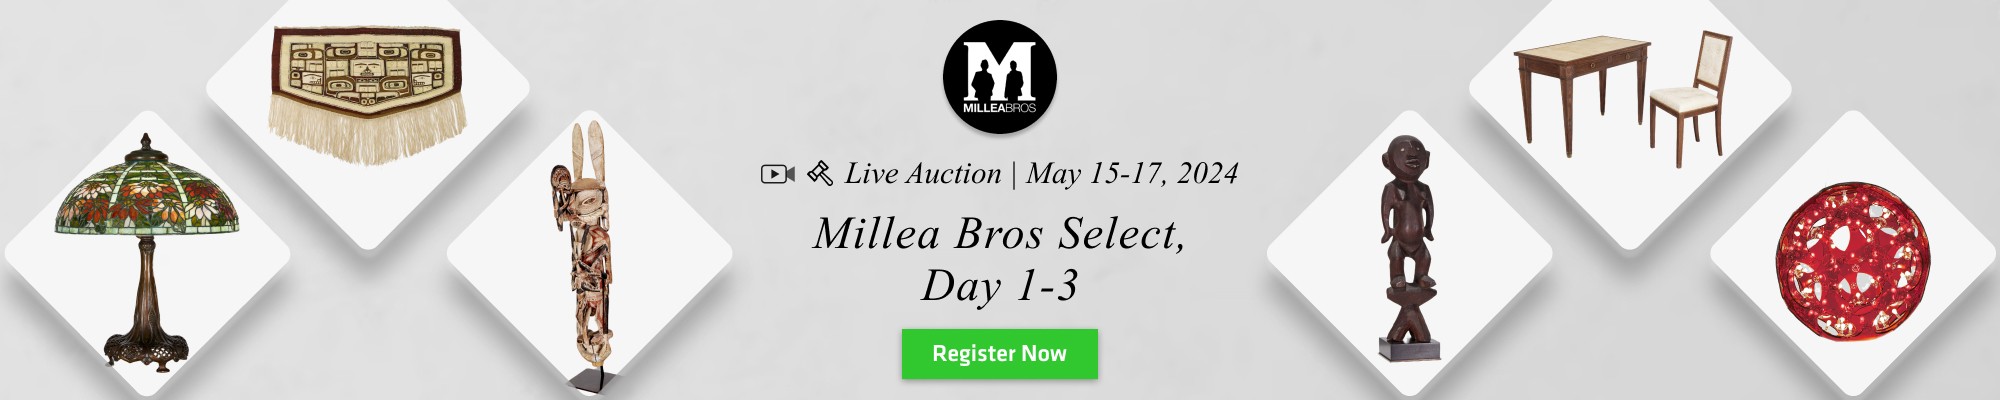 Millea Bros Select, Day 1-3